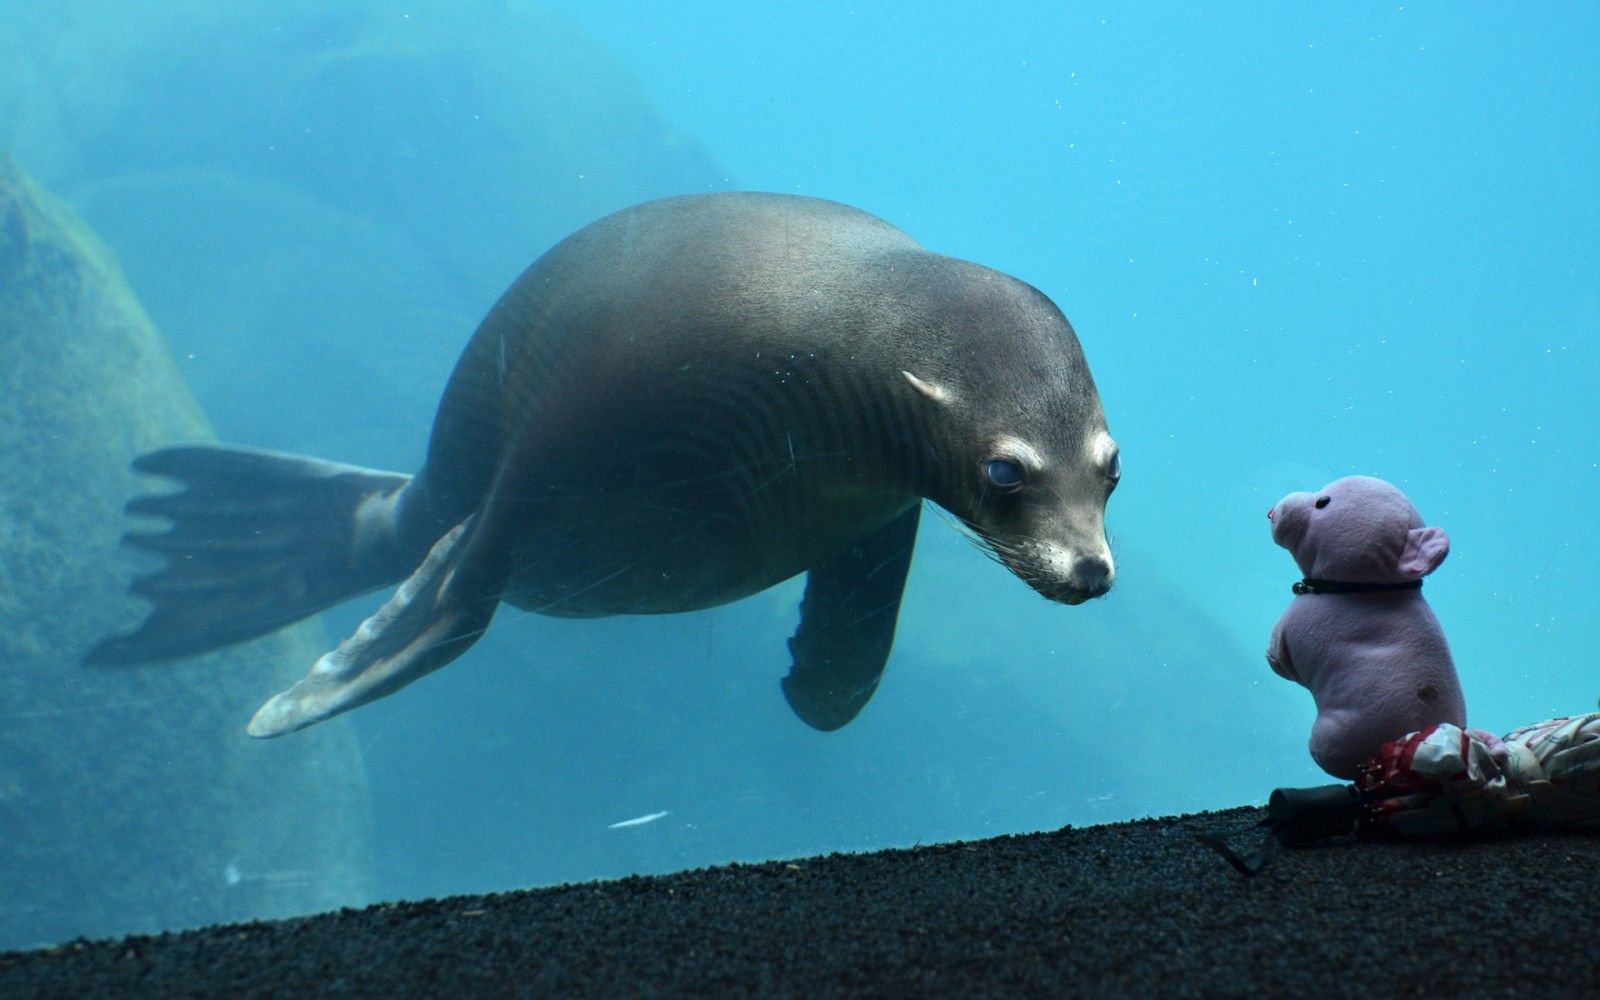 Wallpaper, 1920x1200 px, cute, glass, seal, seals, Toy, toys, underwater 1920x1200